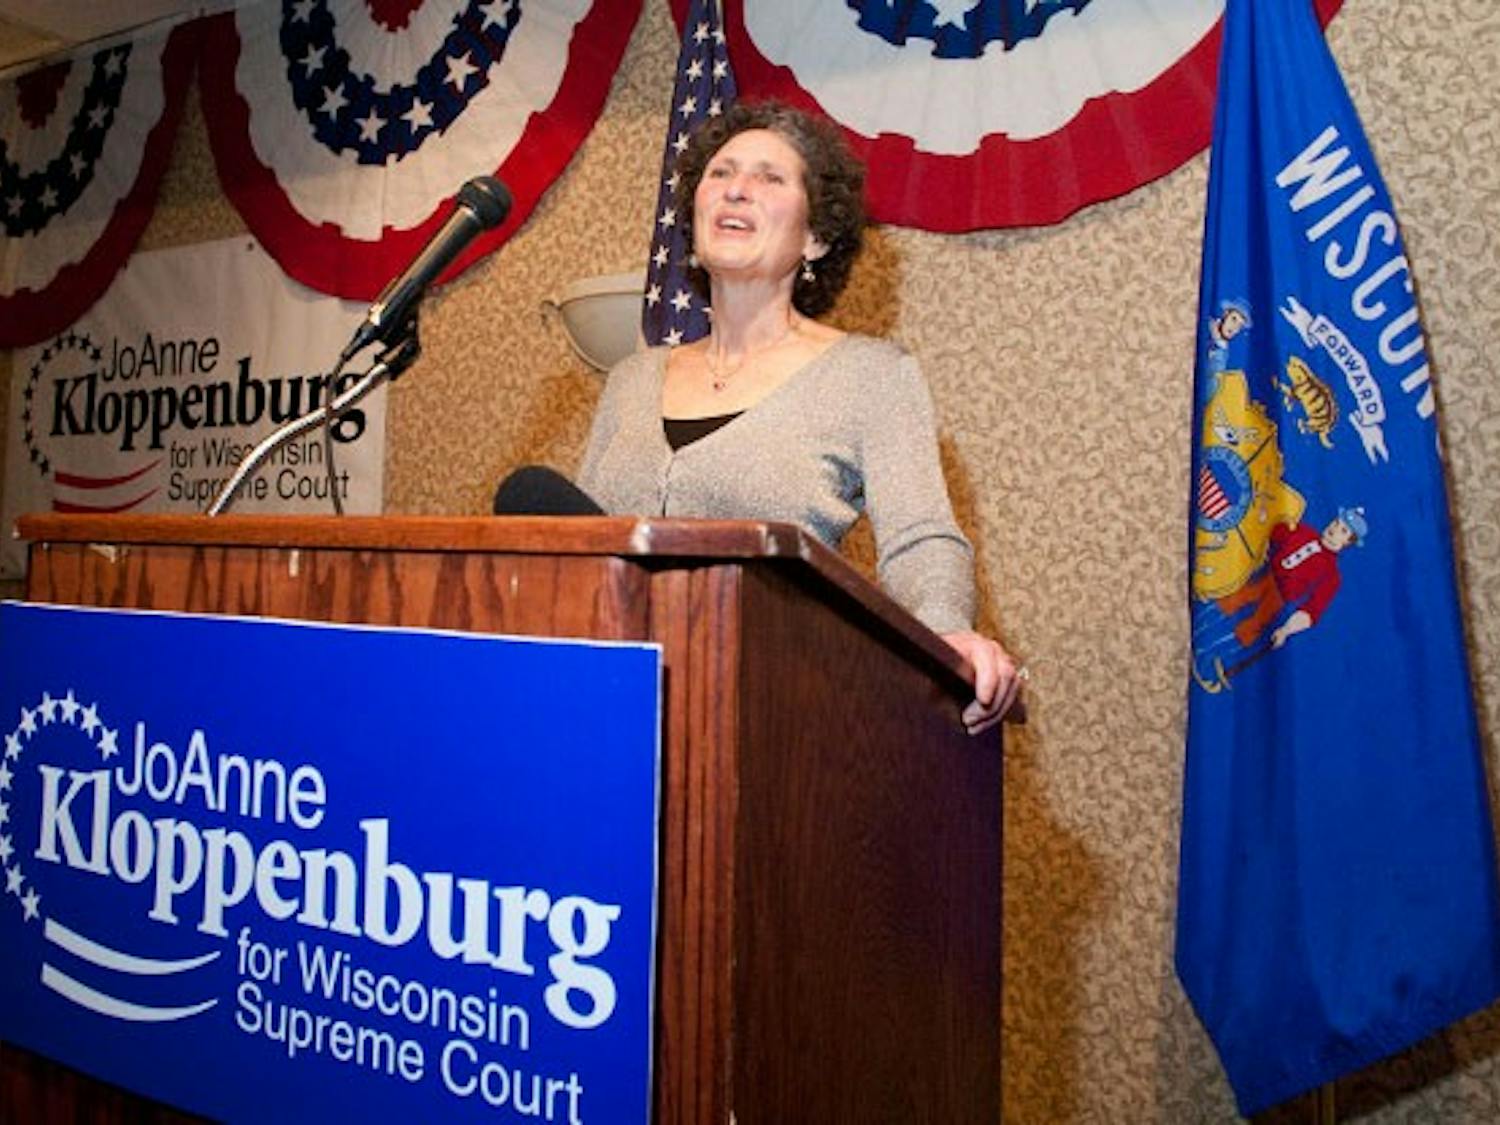 Kloppenburg claims win, recount likely